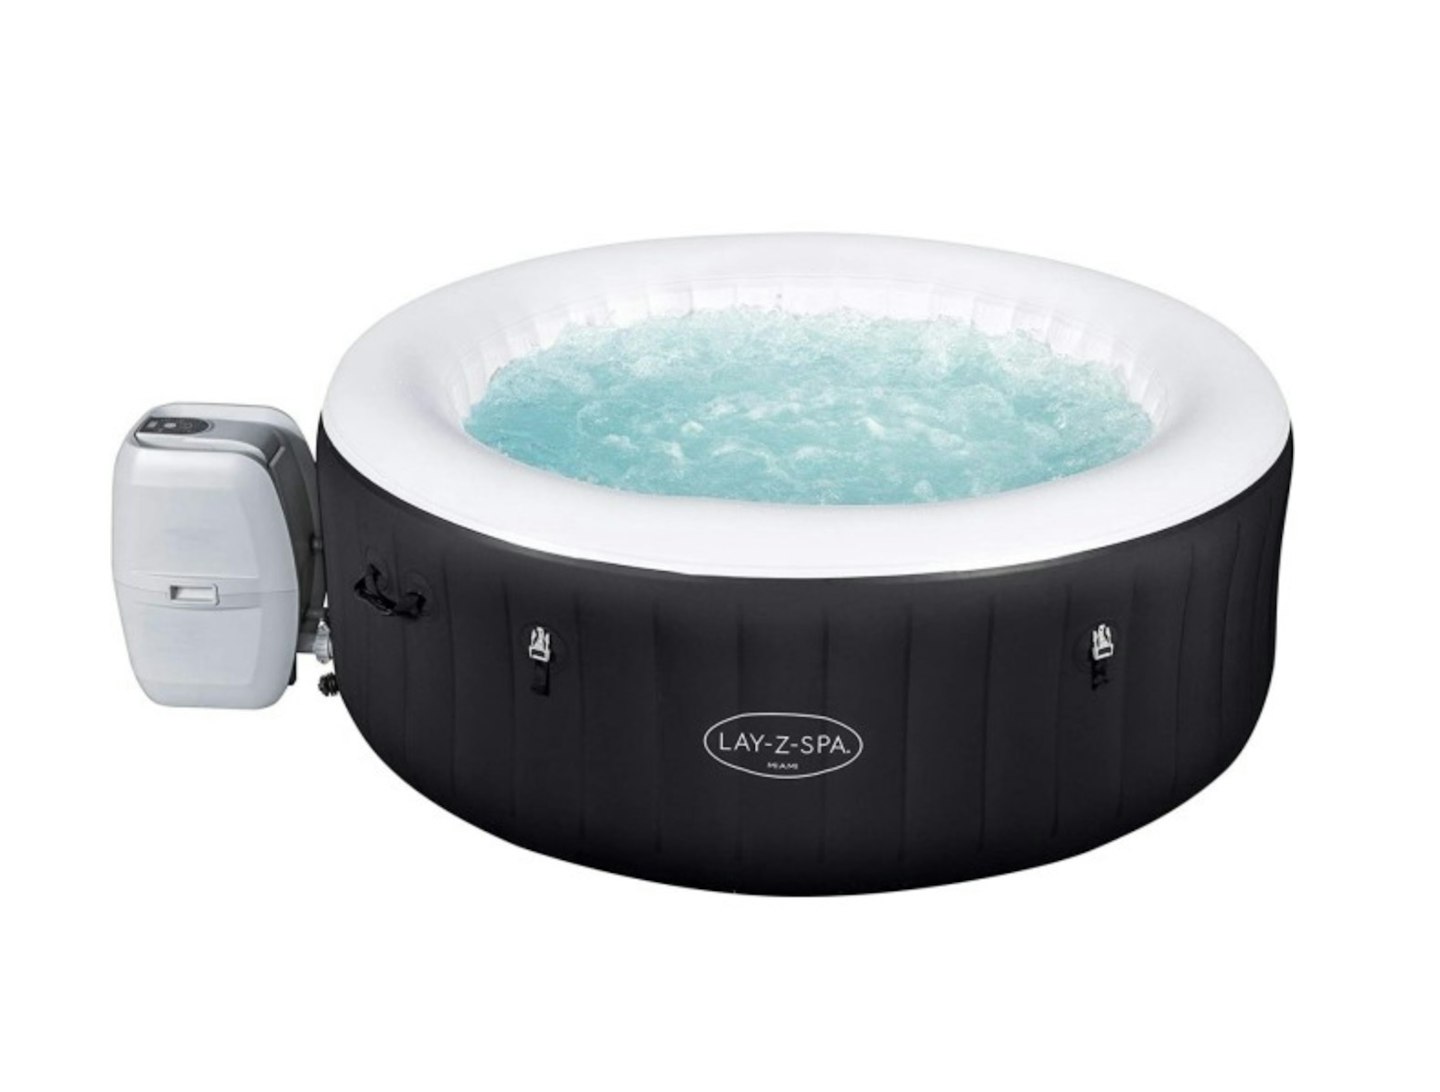 Lay-Z-Spa-AirJet-Miami-4-Person-Inflatable-Hot-Tub-in-Black